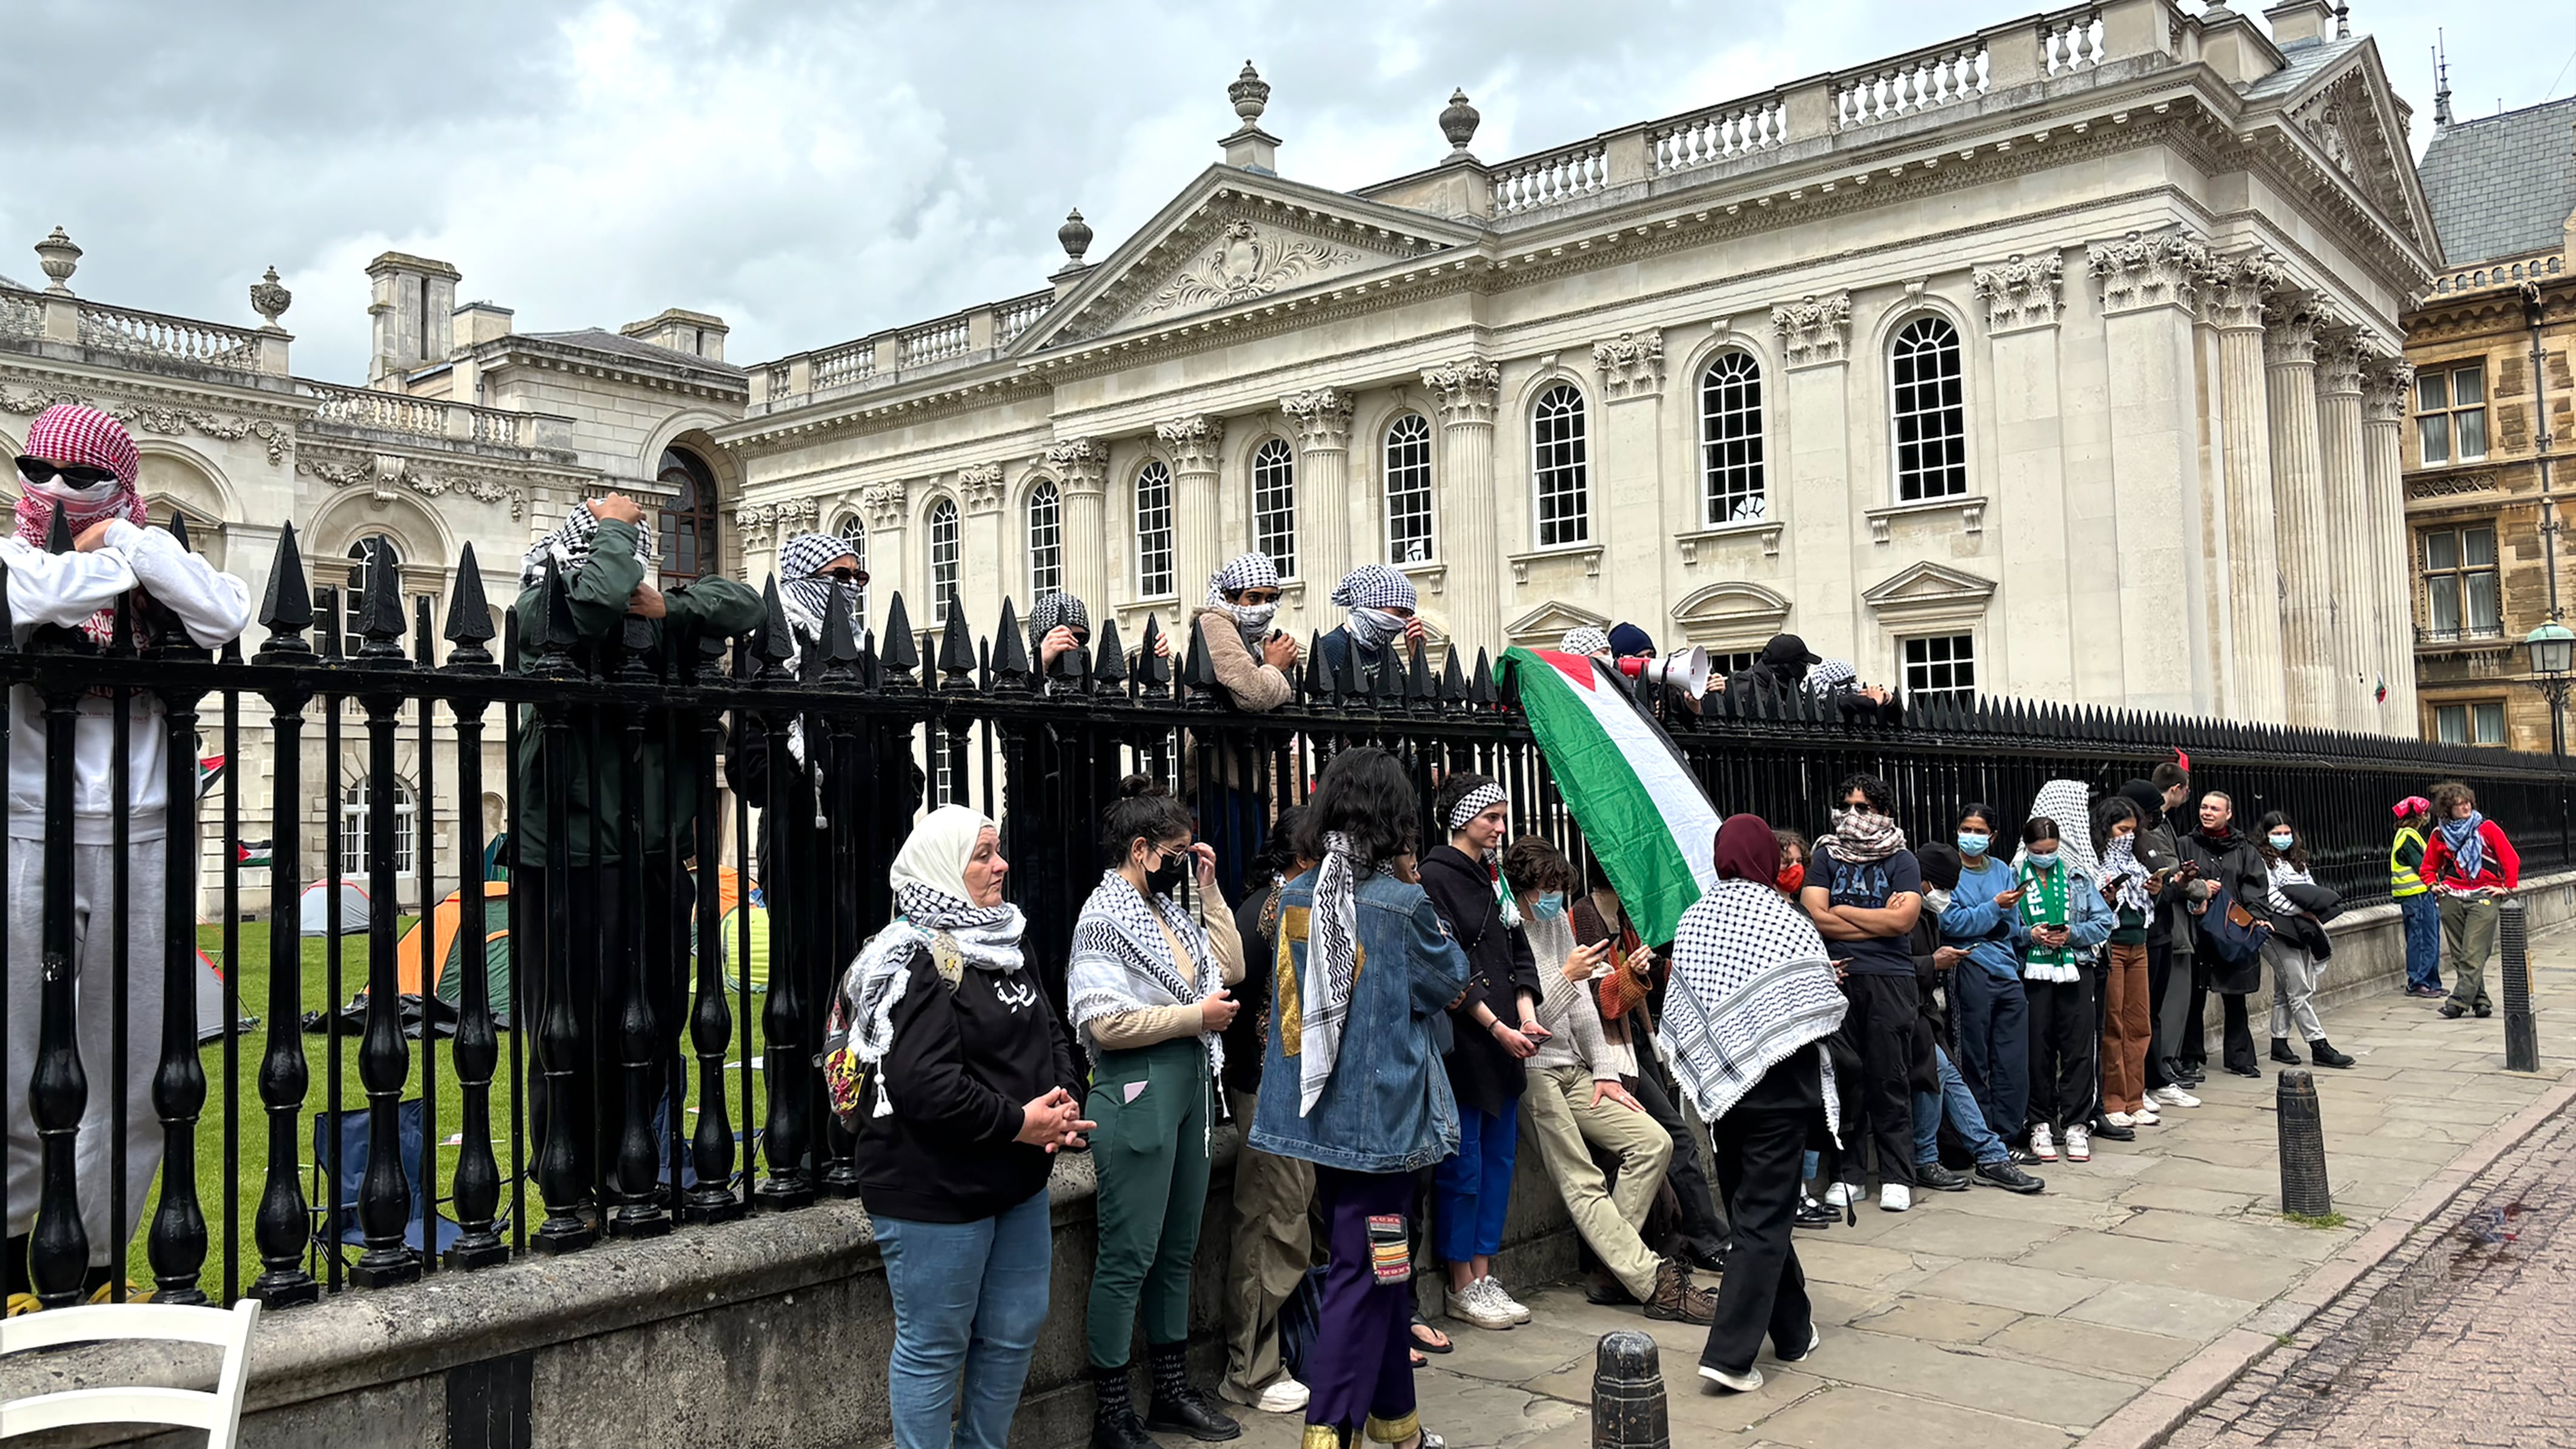 People take part in a protest over the Gaza conflict outside Senate House at Cambridge University